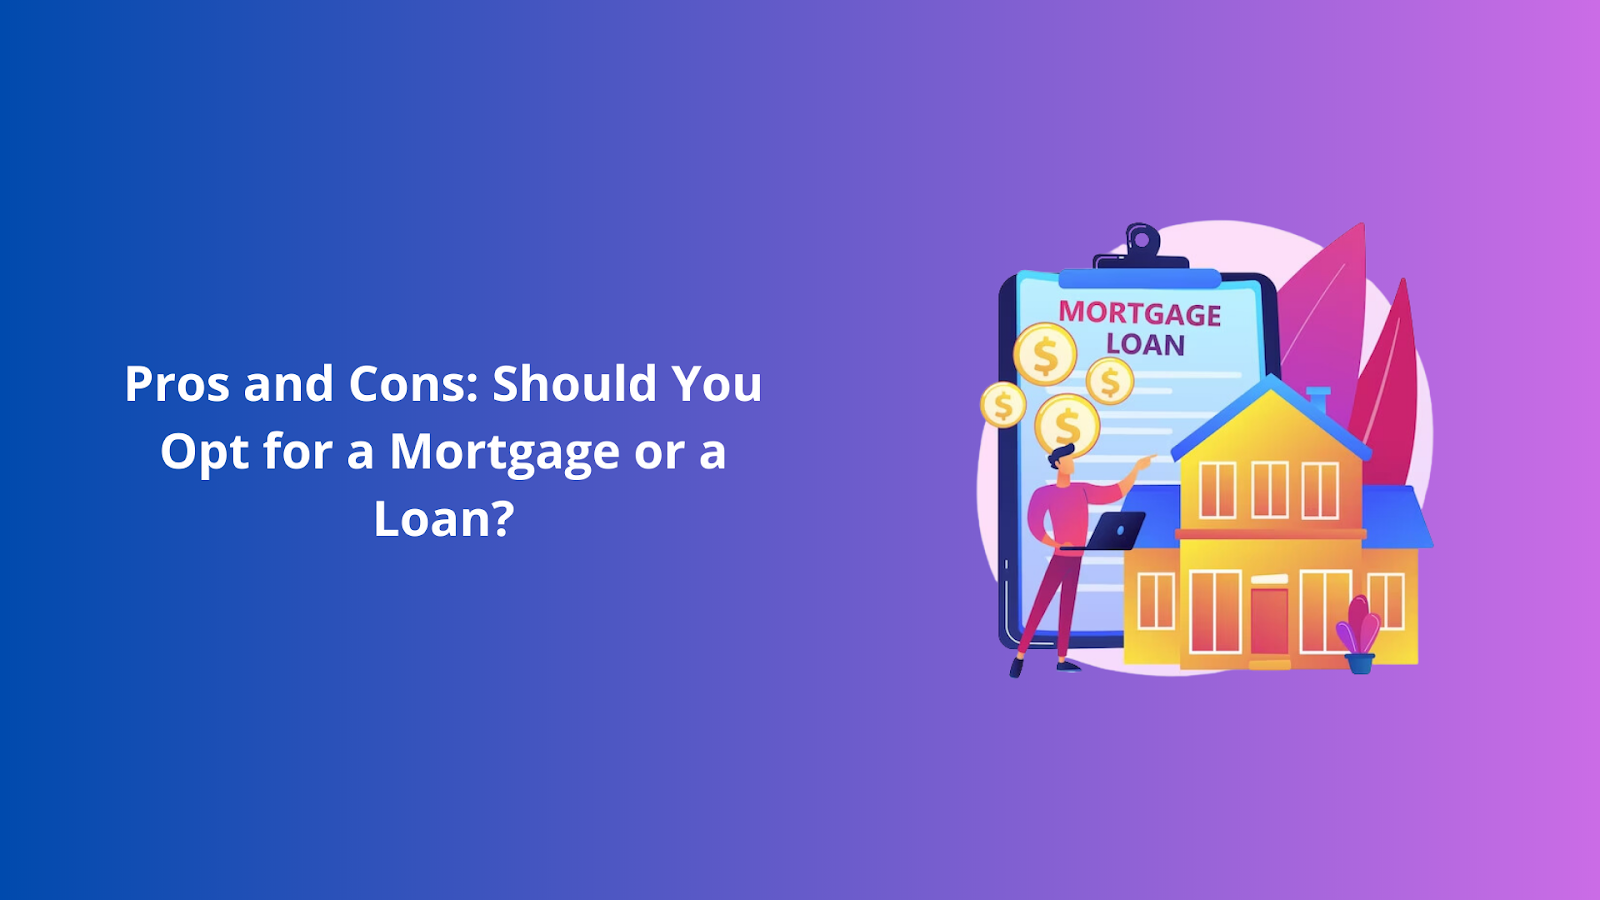 Pros and Cons: Should You Opt for a Mortgage or a Loan?